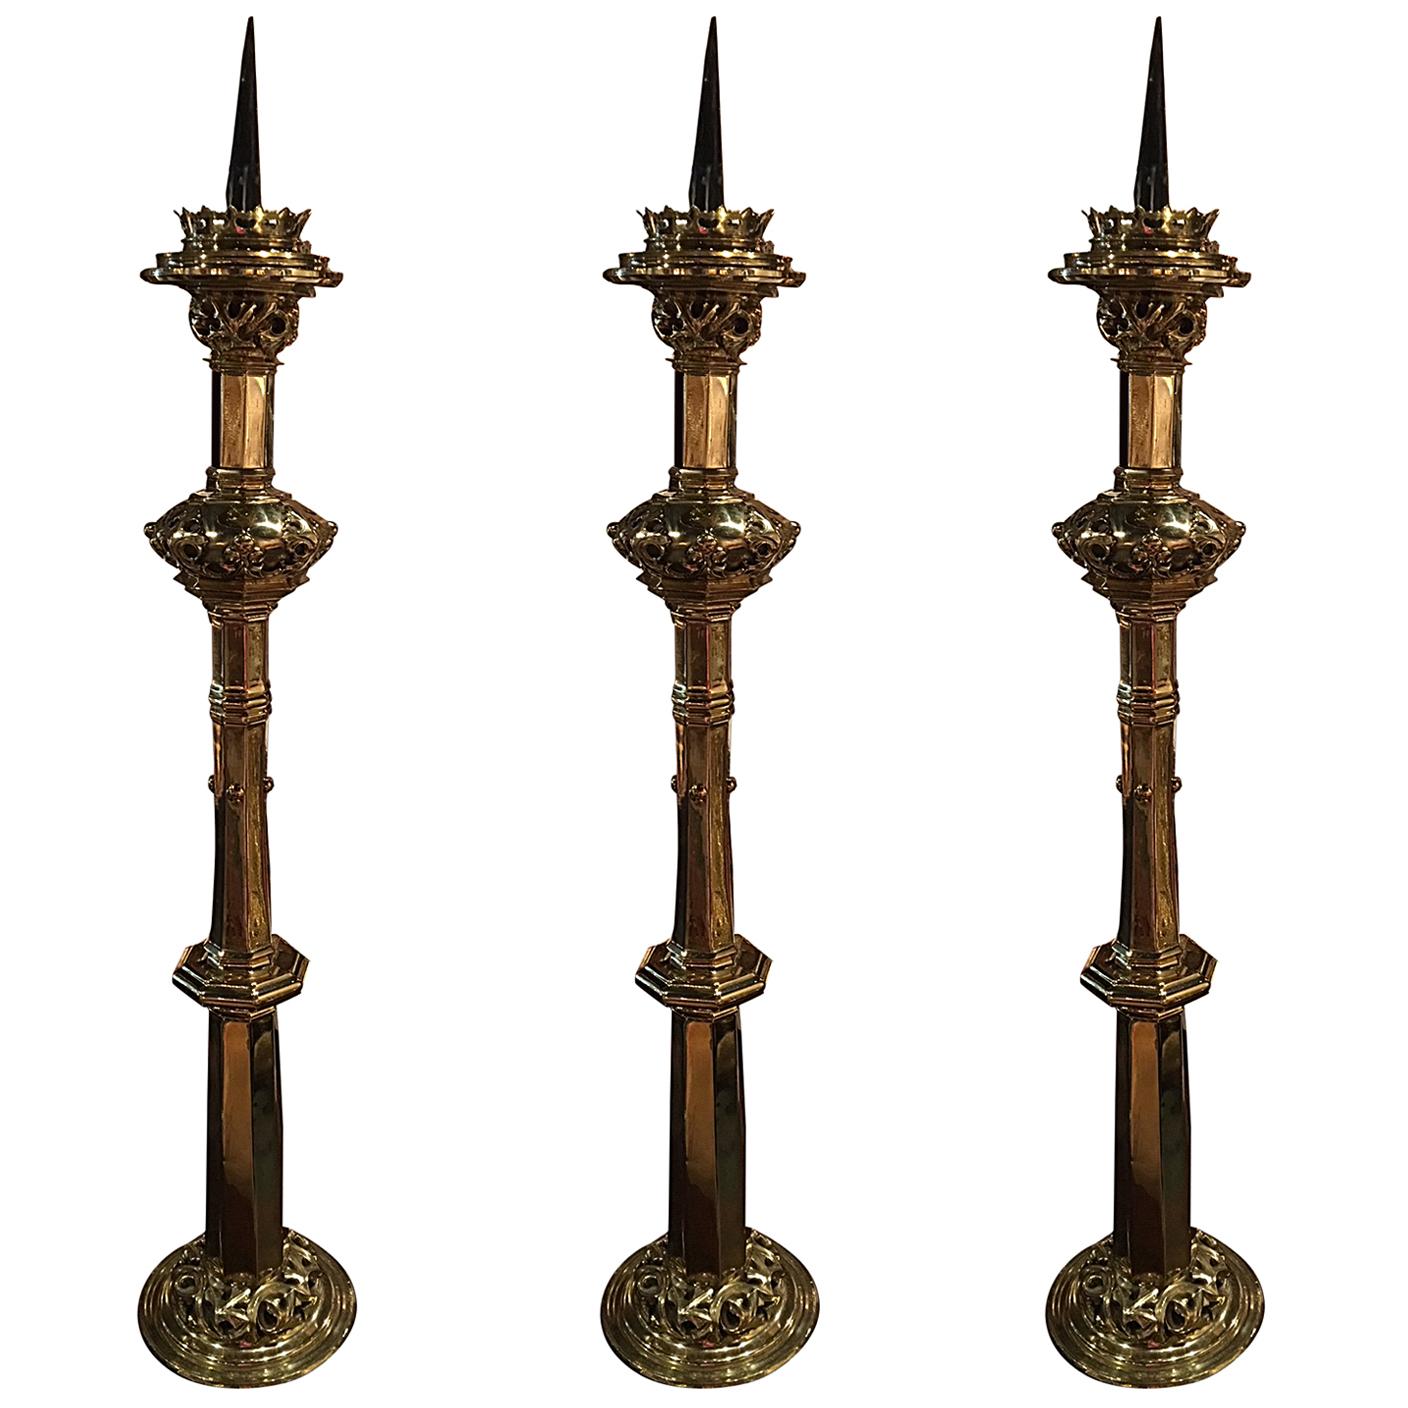 Polished Brass Set of Three Tall Torchere, Candlestick or Prickets, 19th Century For Sale